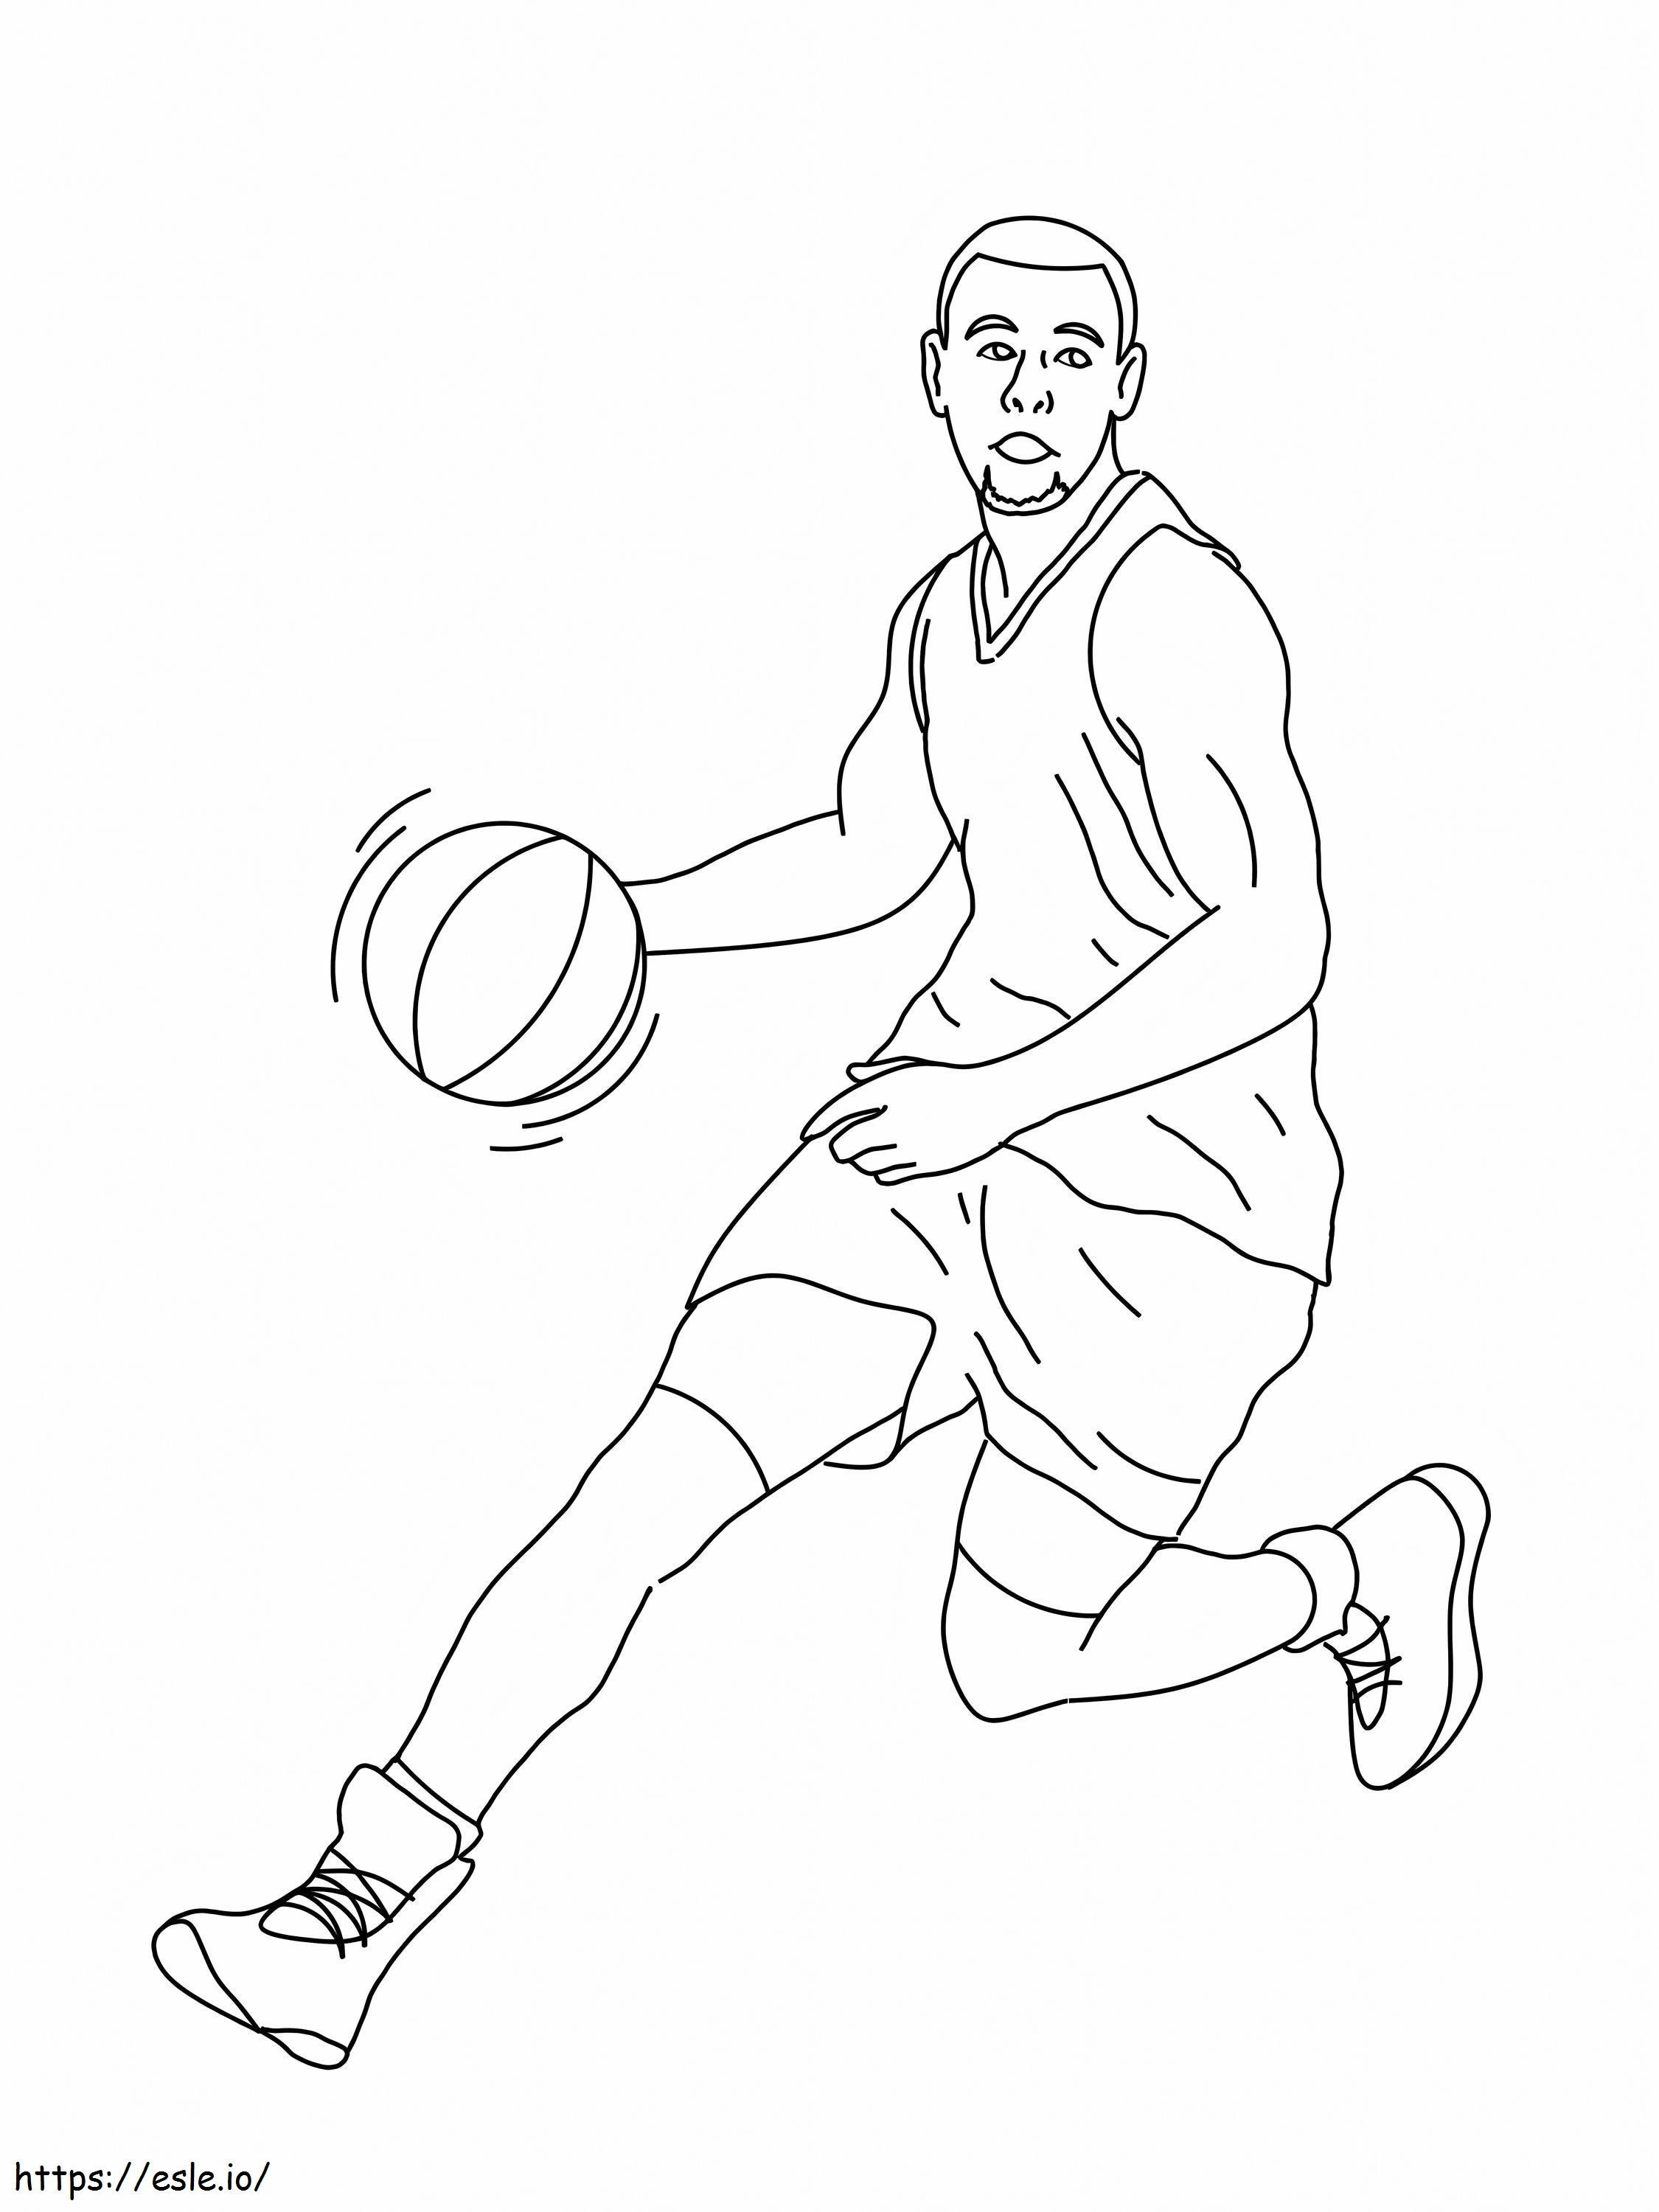 Printable Stephen Curry coloring page